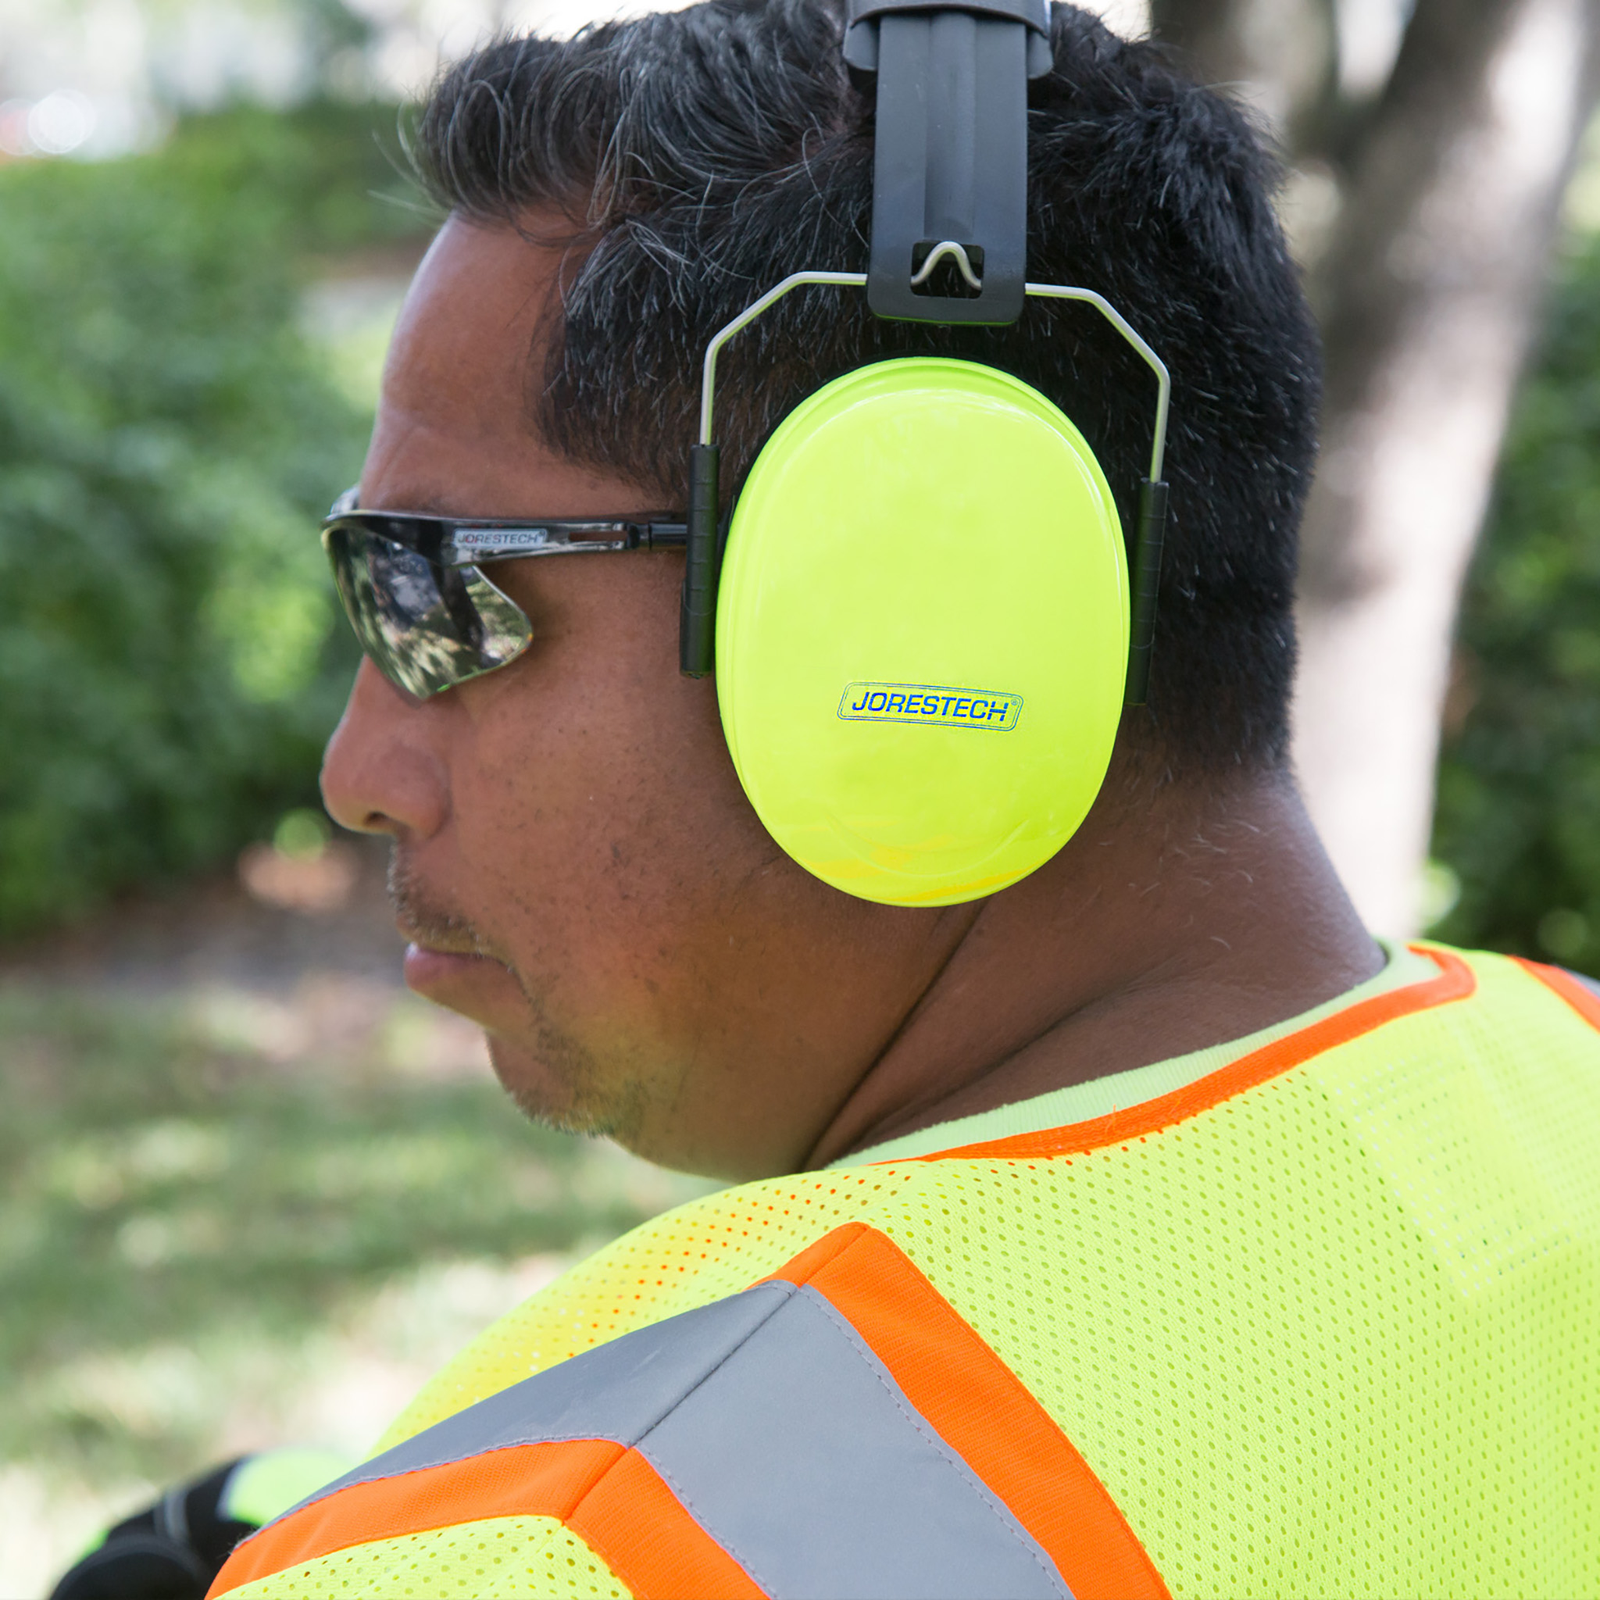 A worker wearing ear muffs over sunglasses in a setting outdoors